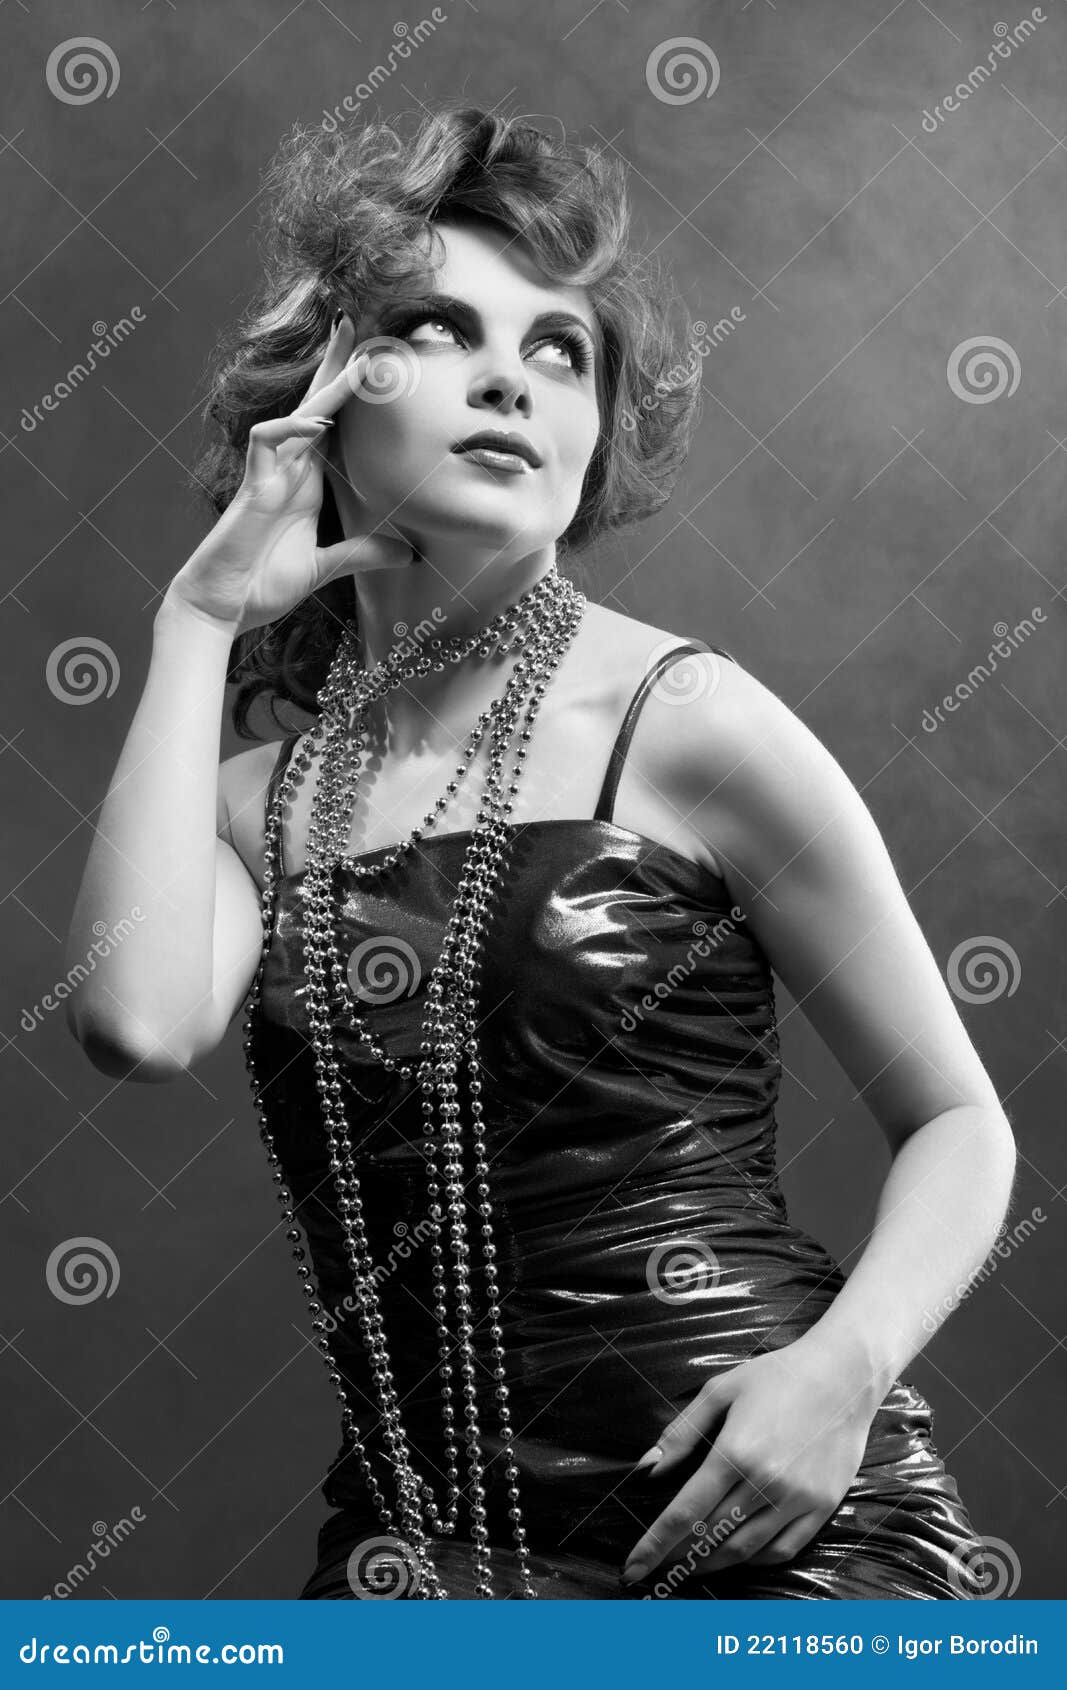 Woman In Old Fashioned Dress, In Black & White Stock Photo 